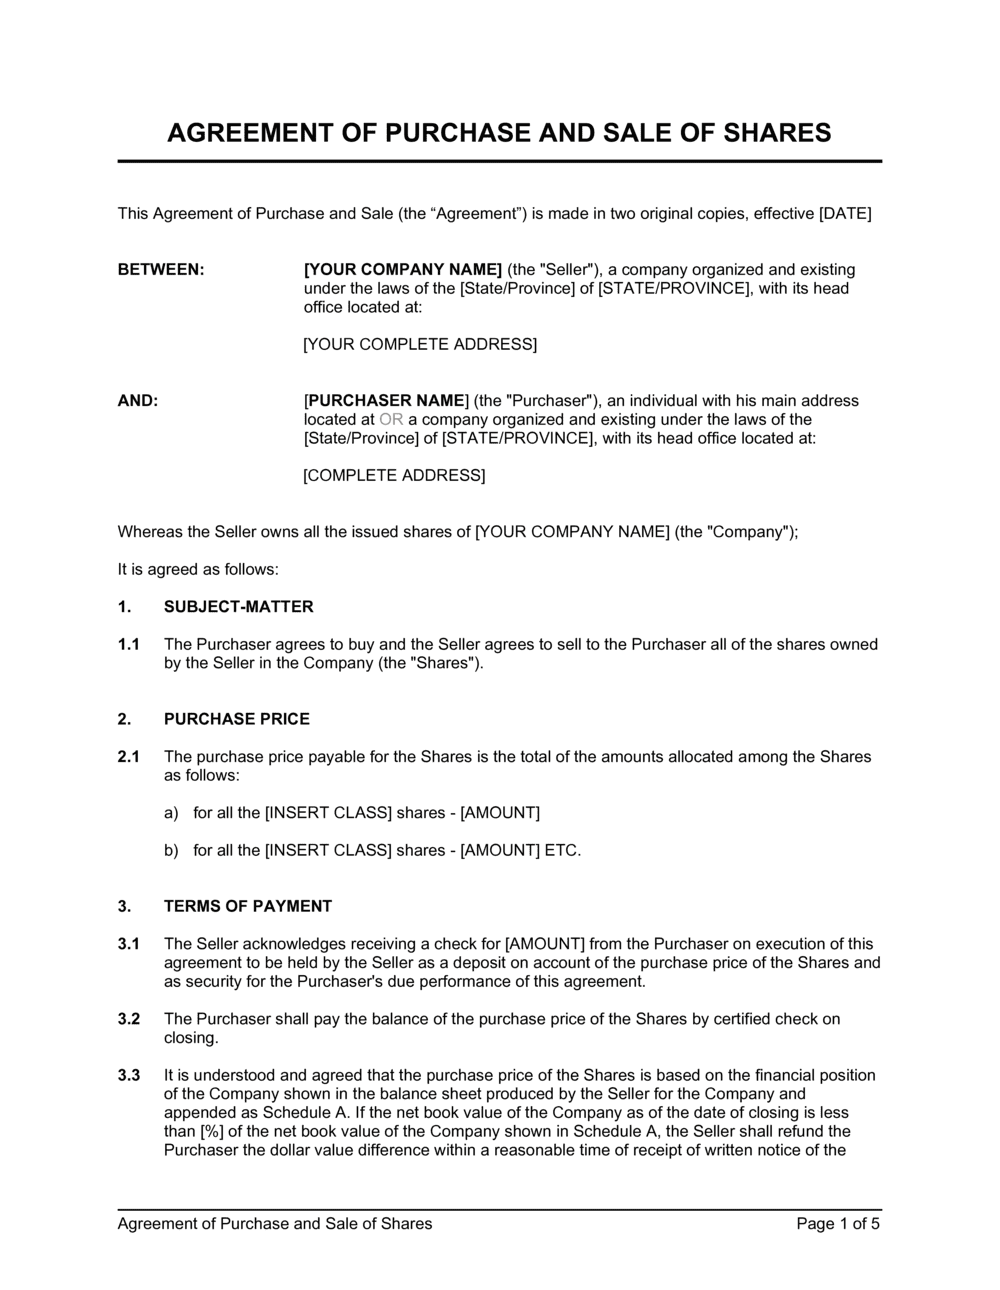 Share Purchase Agreement Template from templates.business-in-a-box.com